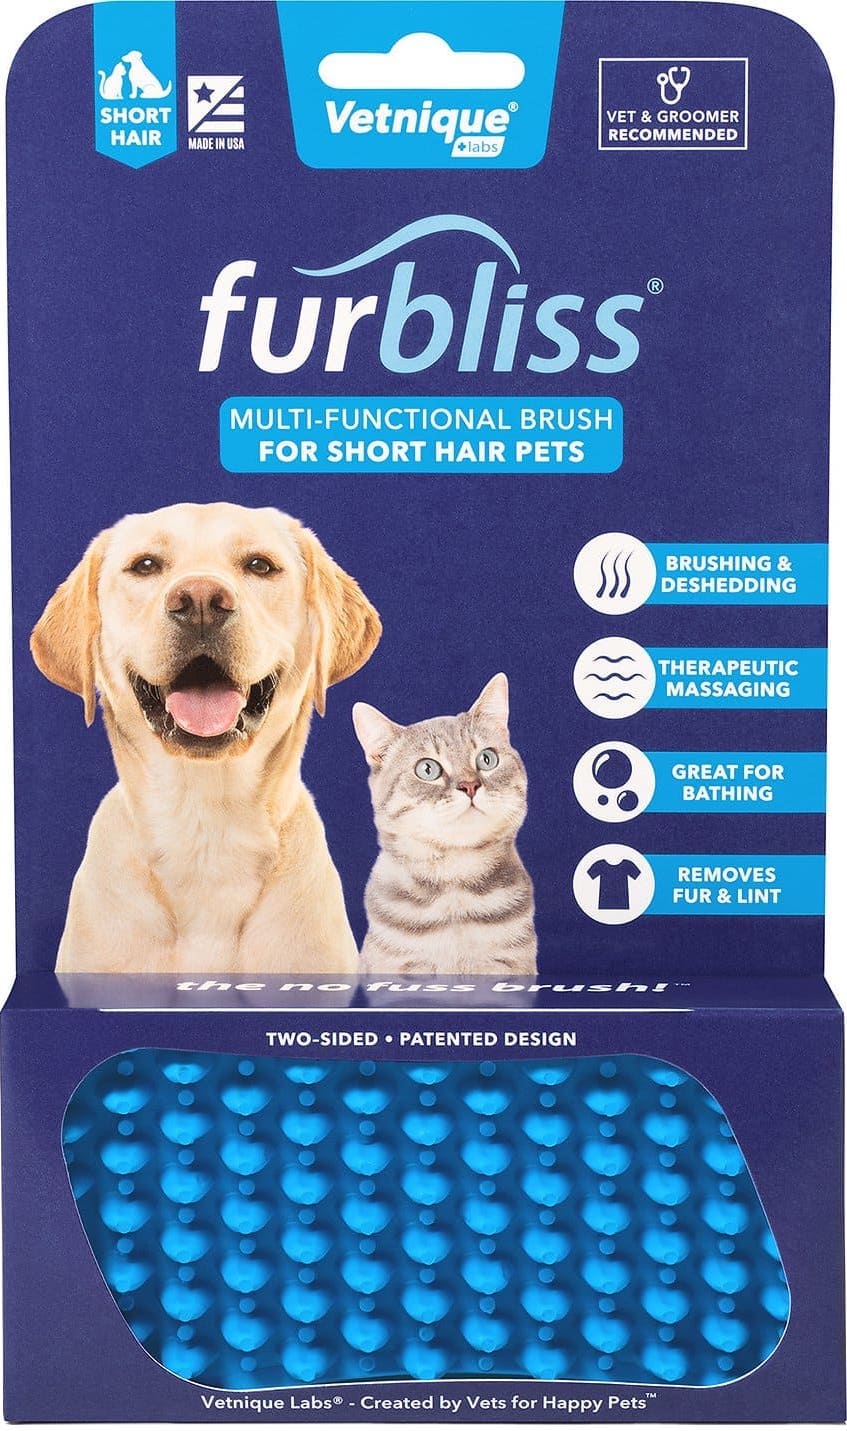 Furbliss Multi-Functional Brush for Pets 1 count with short hair (Blue)	 1